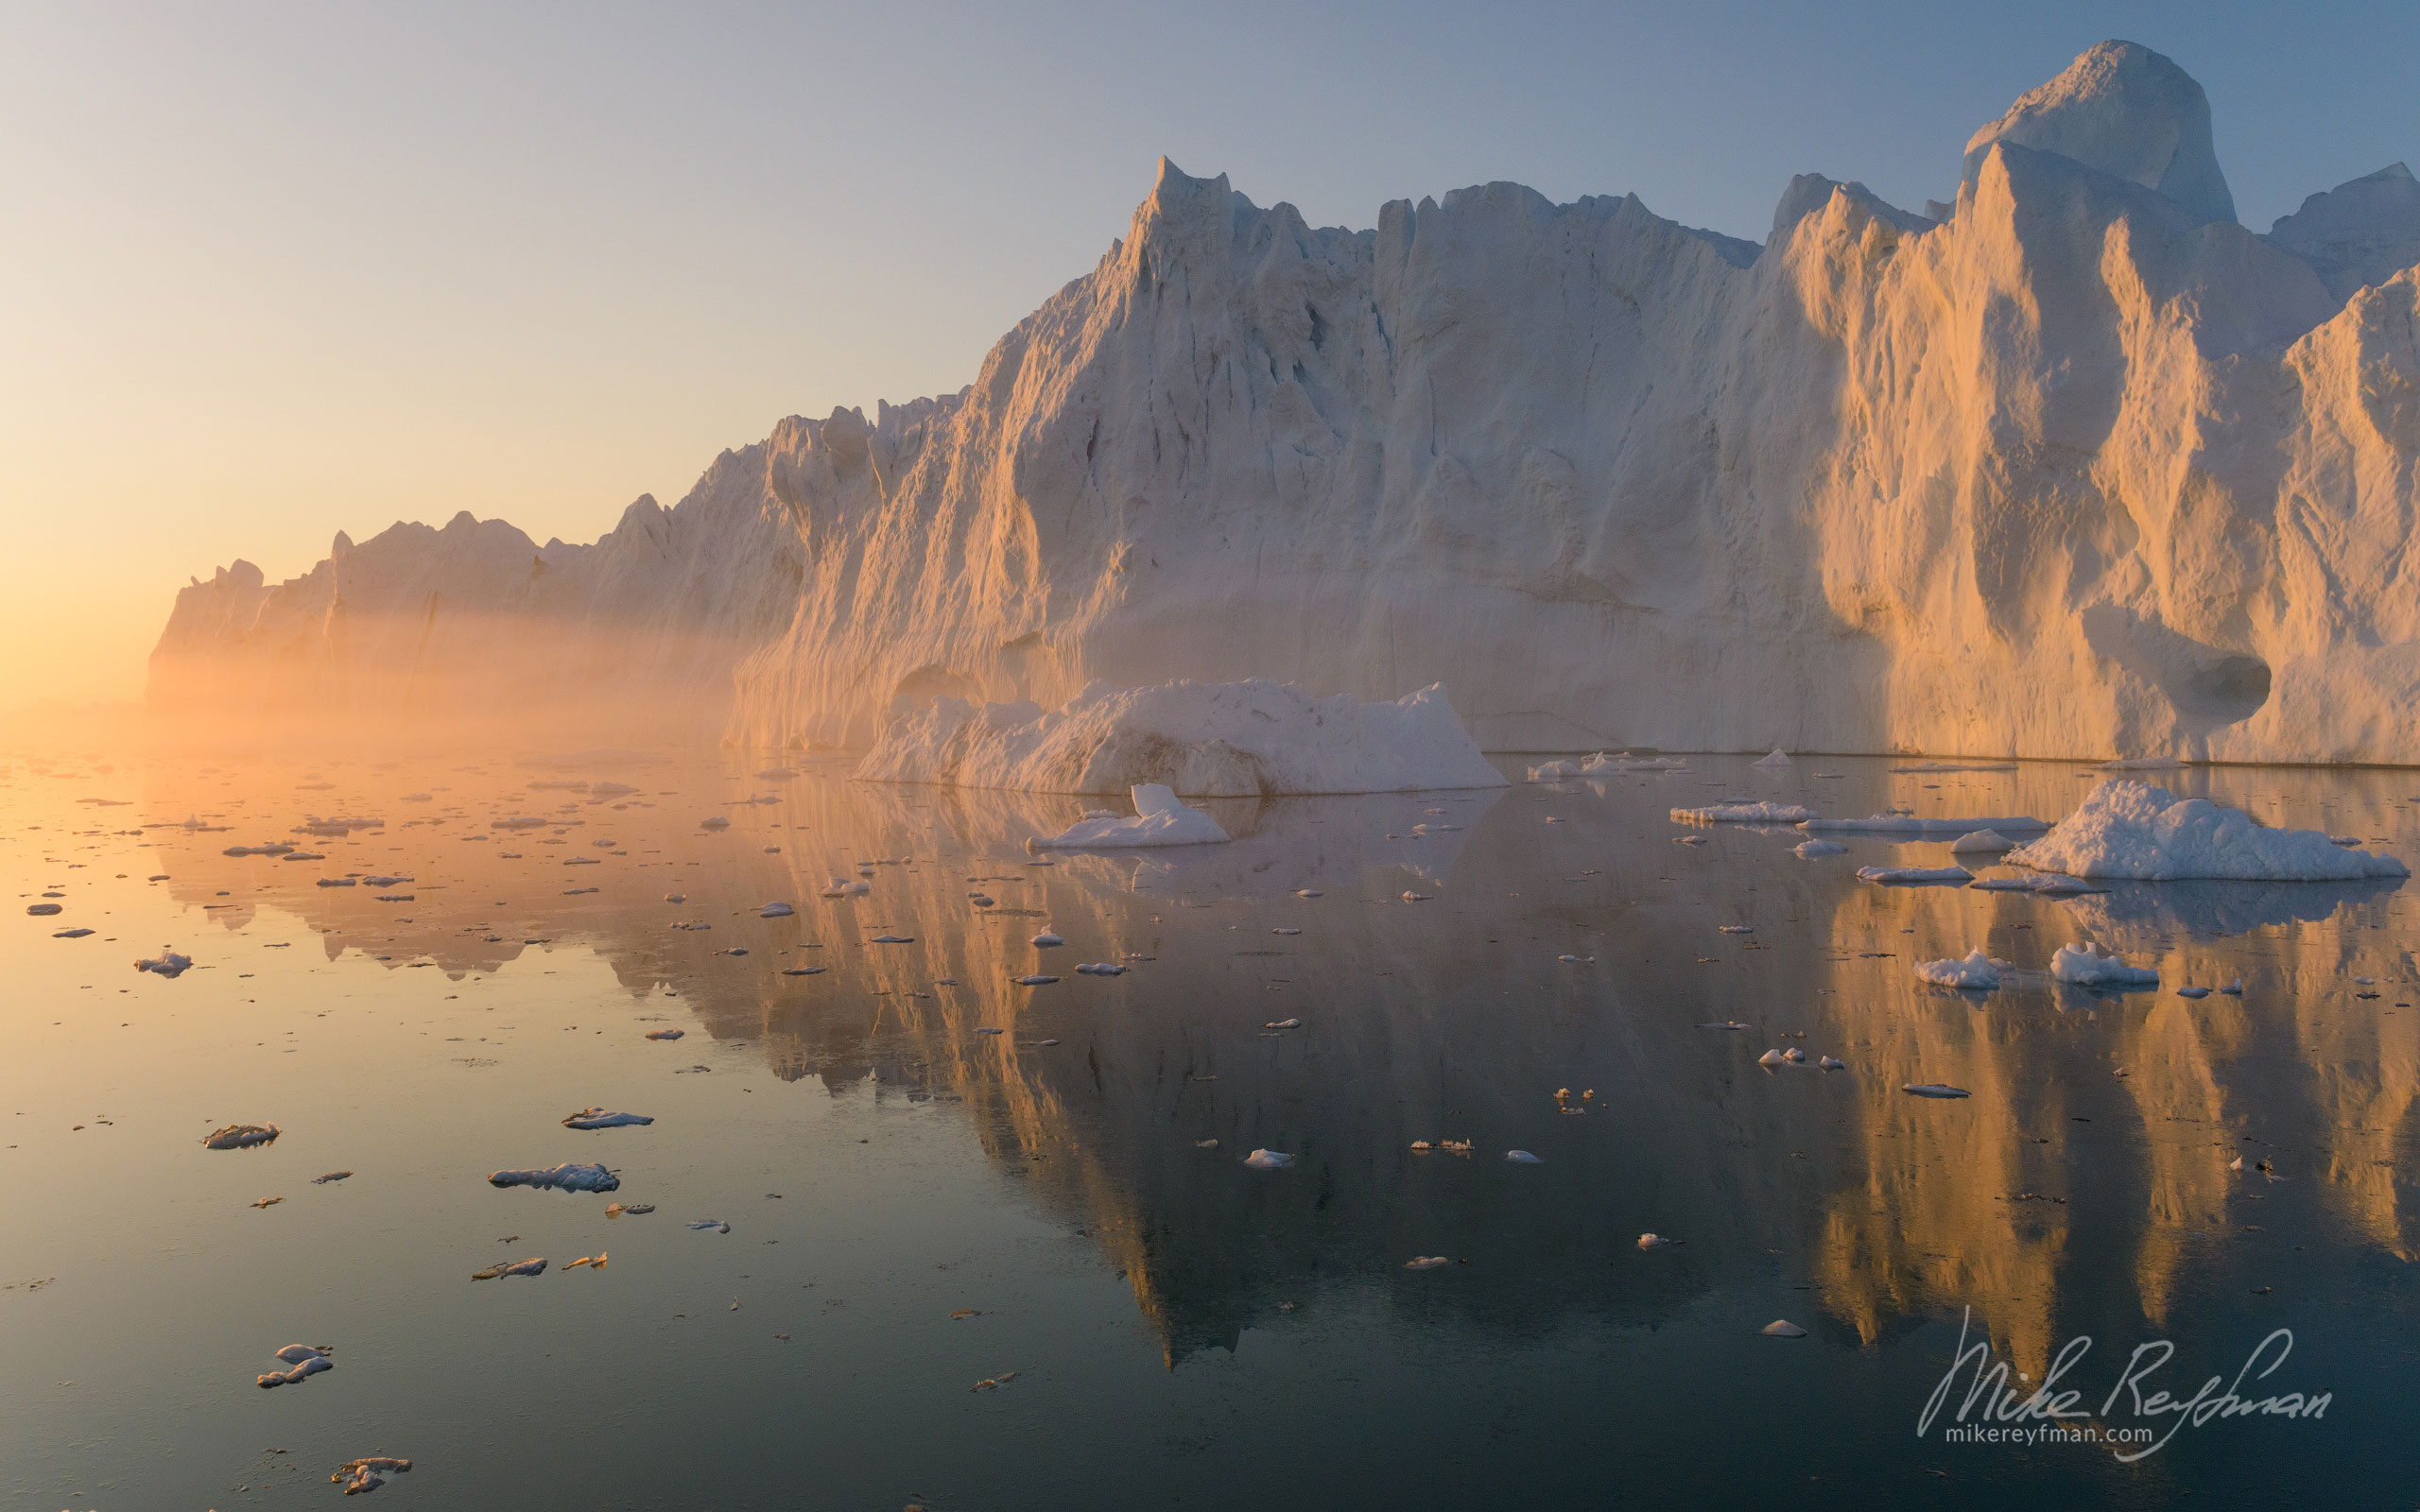 Icebergs in Ilulissat Icefjord. Disco Bay, Greenland. 003-GR-IL_D8B6043 - Enormous icebergs of Ilulissat Icefjord and Disco Bay. Western Greenland. - Mike Reyfman Photography